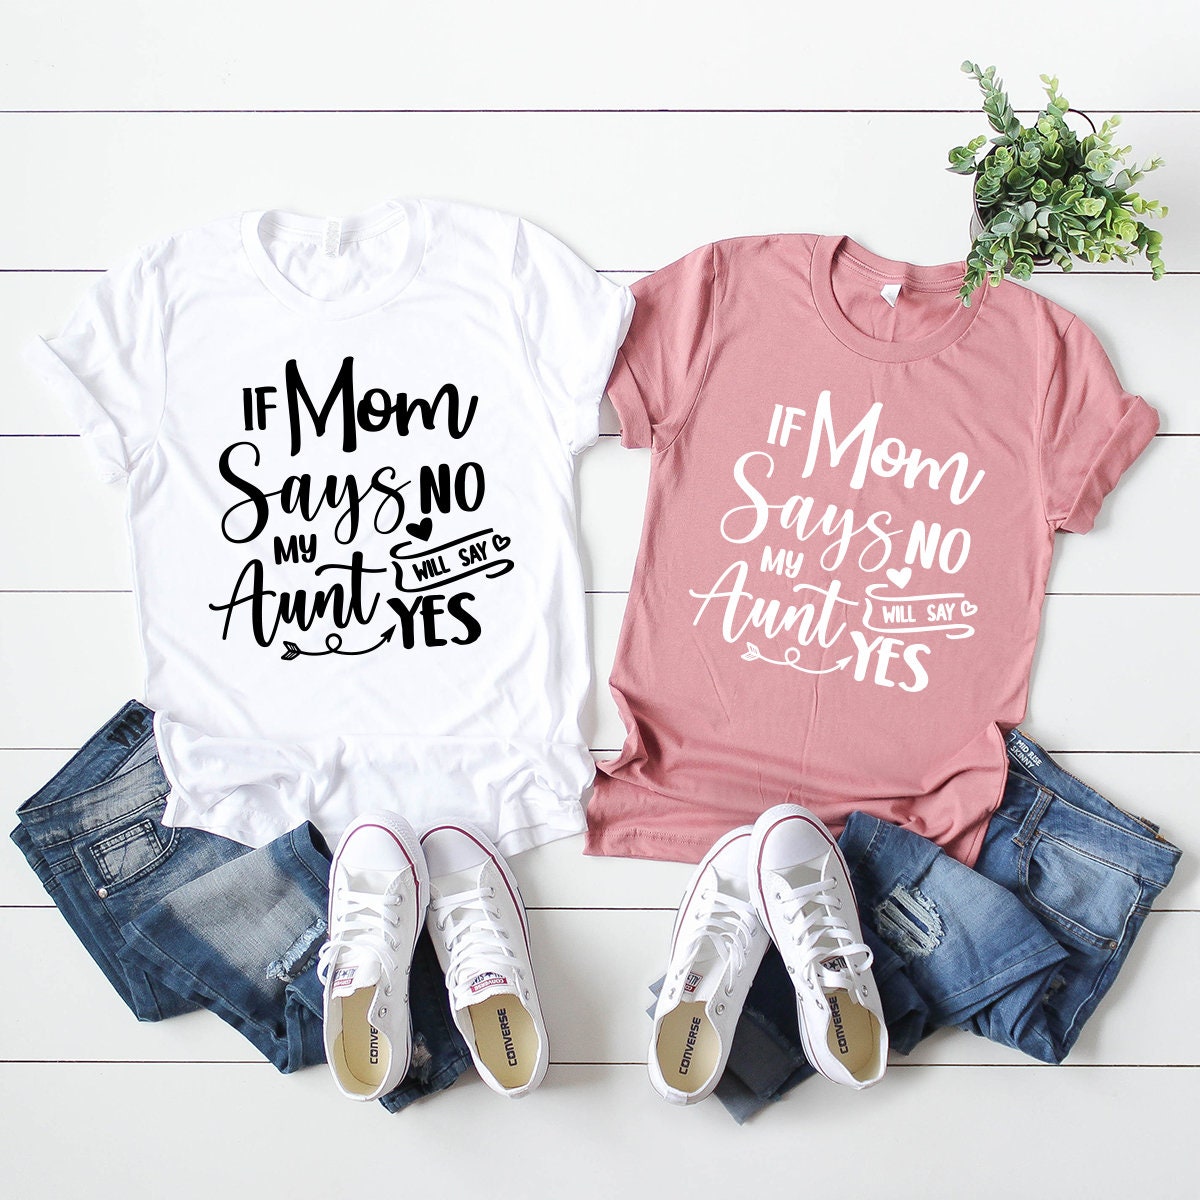 Funny Aunt Shirts, Gift For Aunt, Aunt T-shirt, Best Auntie Ever Tee, Auntie Tee, Aunt Gift, If Mom Says No My Aunt Will Say Yes Shirt - Fastdeliverytees.com